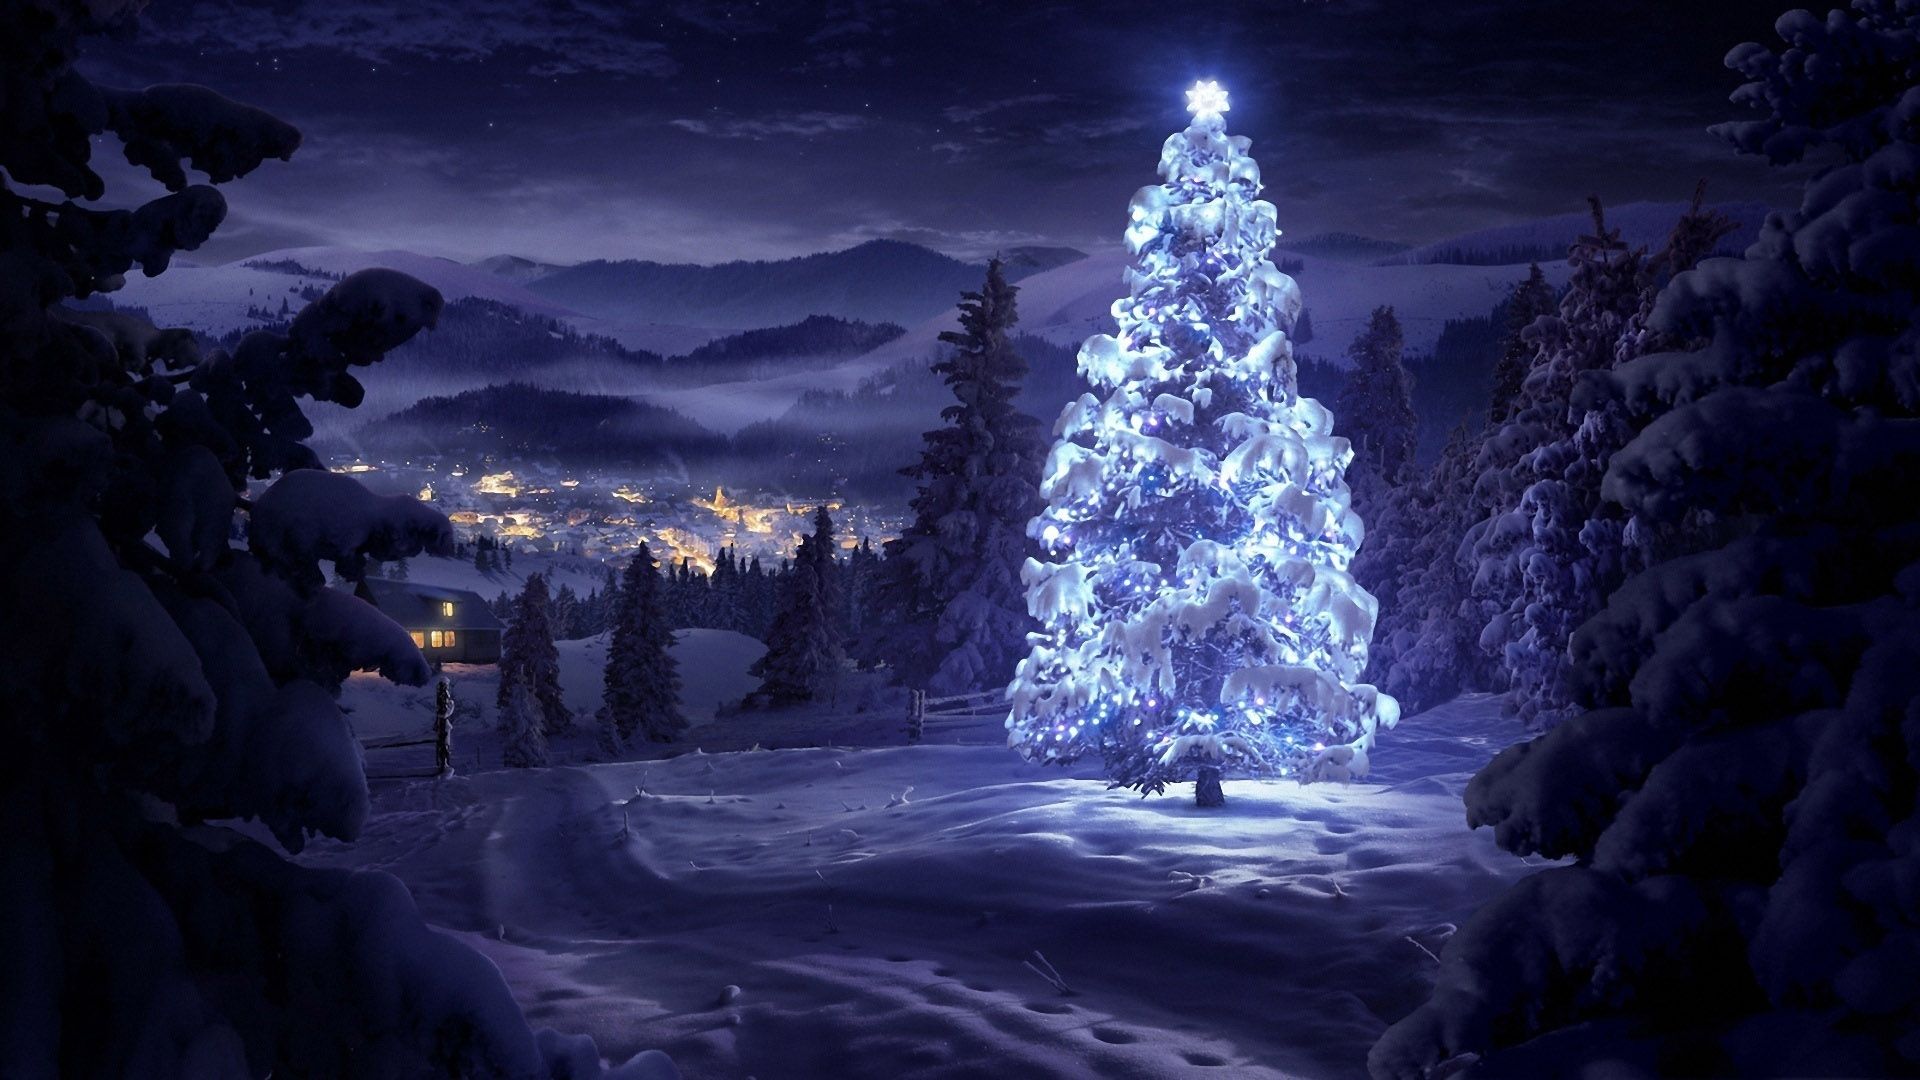  download White Christmas tree in the nature HD snowy 1920x1080